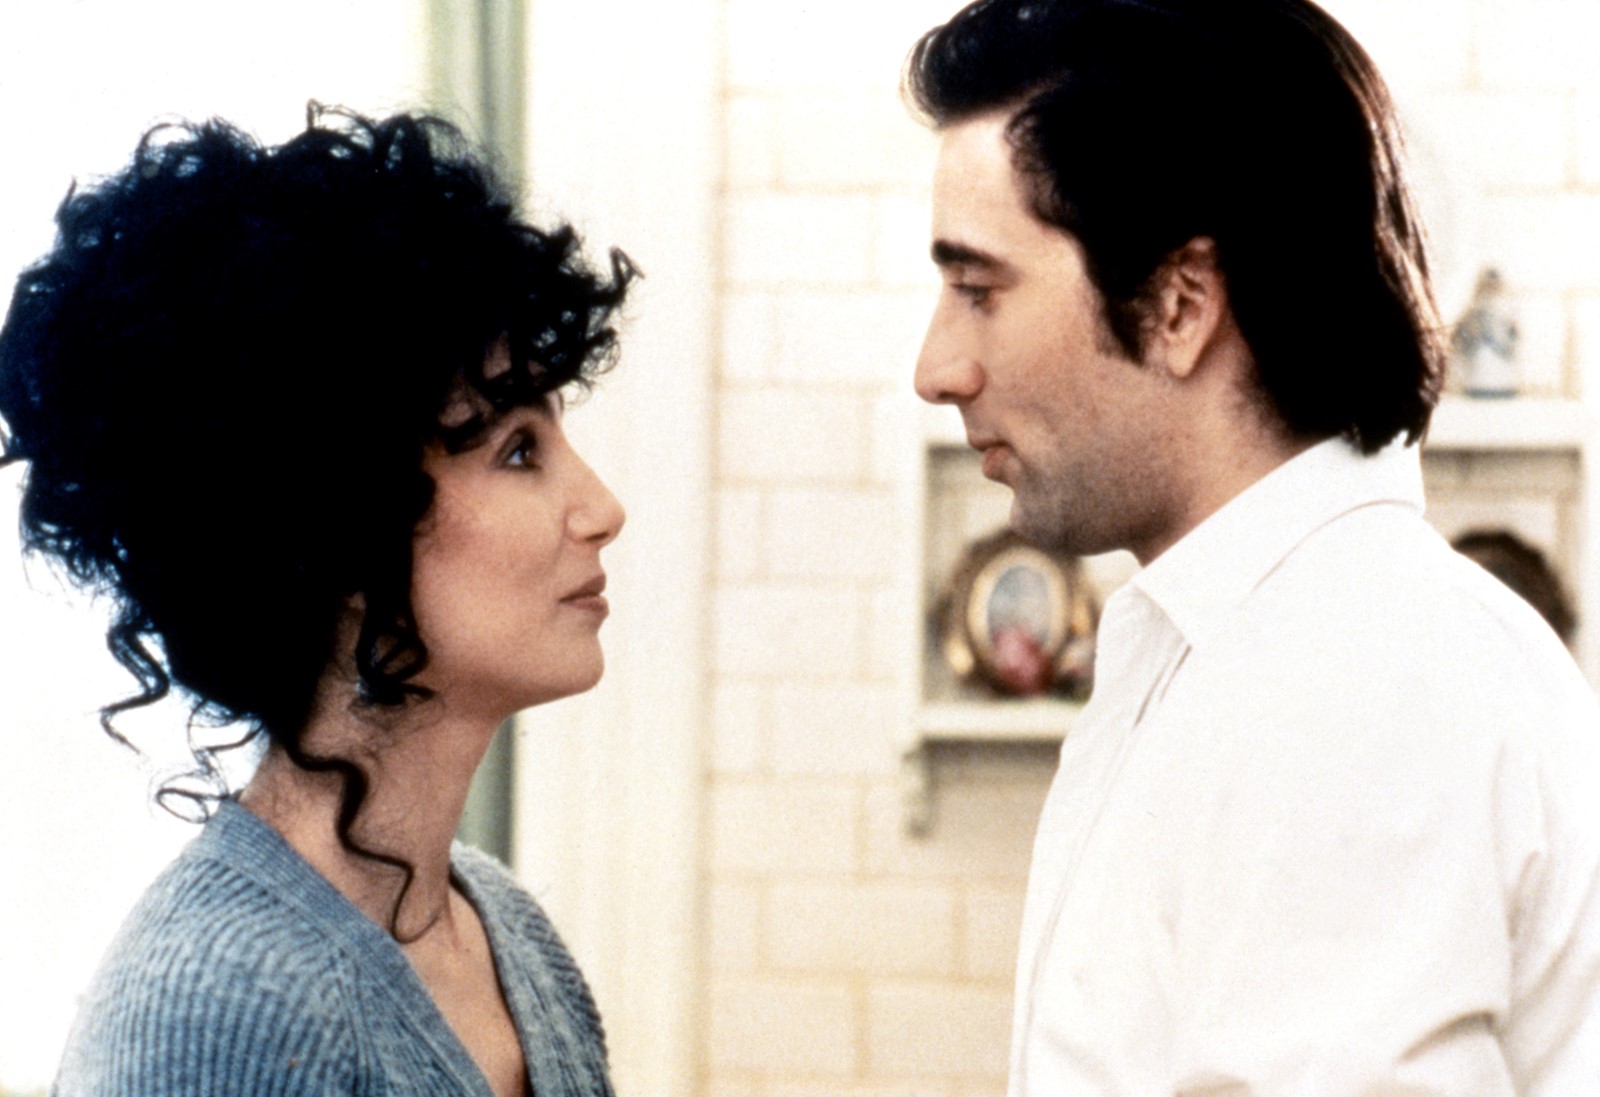 Cher and Nicolas Cage on the set of Moonstruck